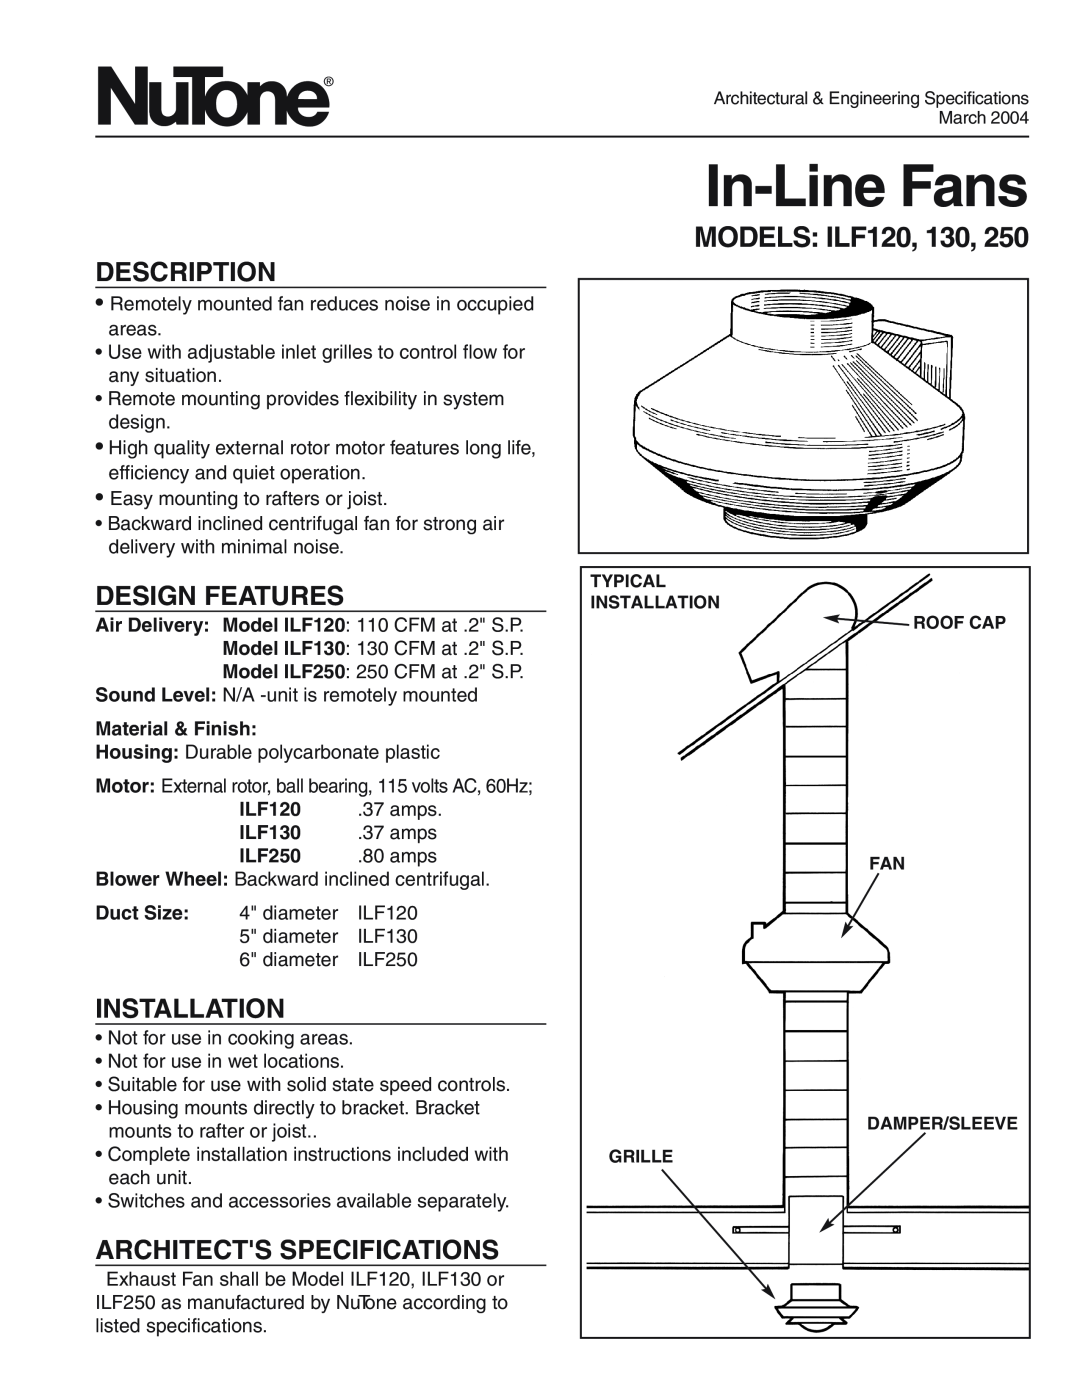 NuTone specifications In-LineFans, MODELS ILF120, Description, Design Features, Installation, Architects Specifications 